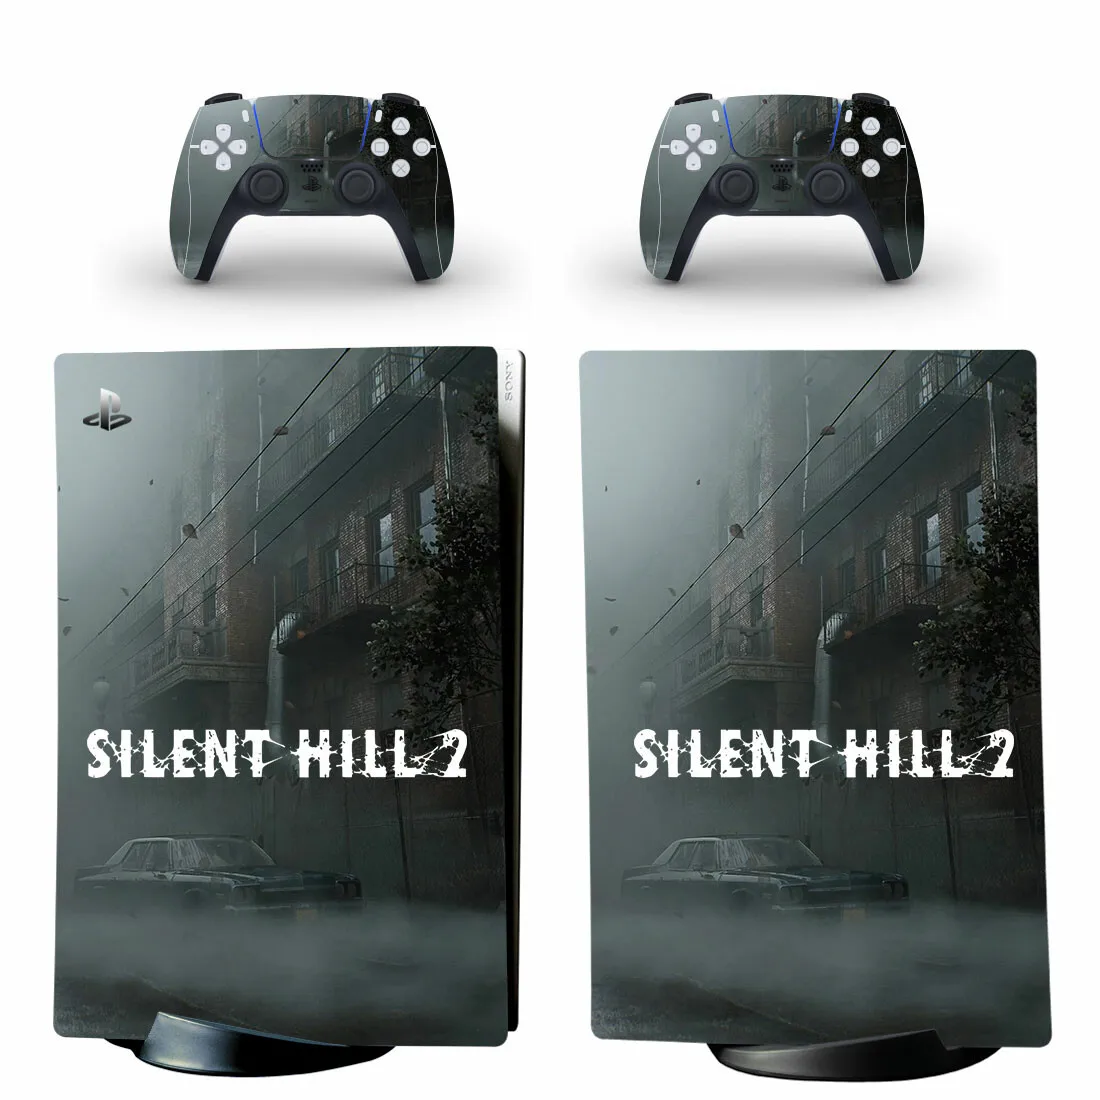 Silent Hill 2 PS5 Digital Skin Sticker Decal Cover for Console and